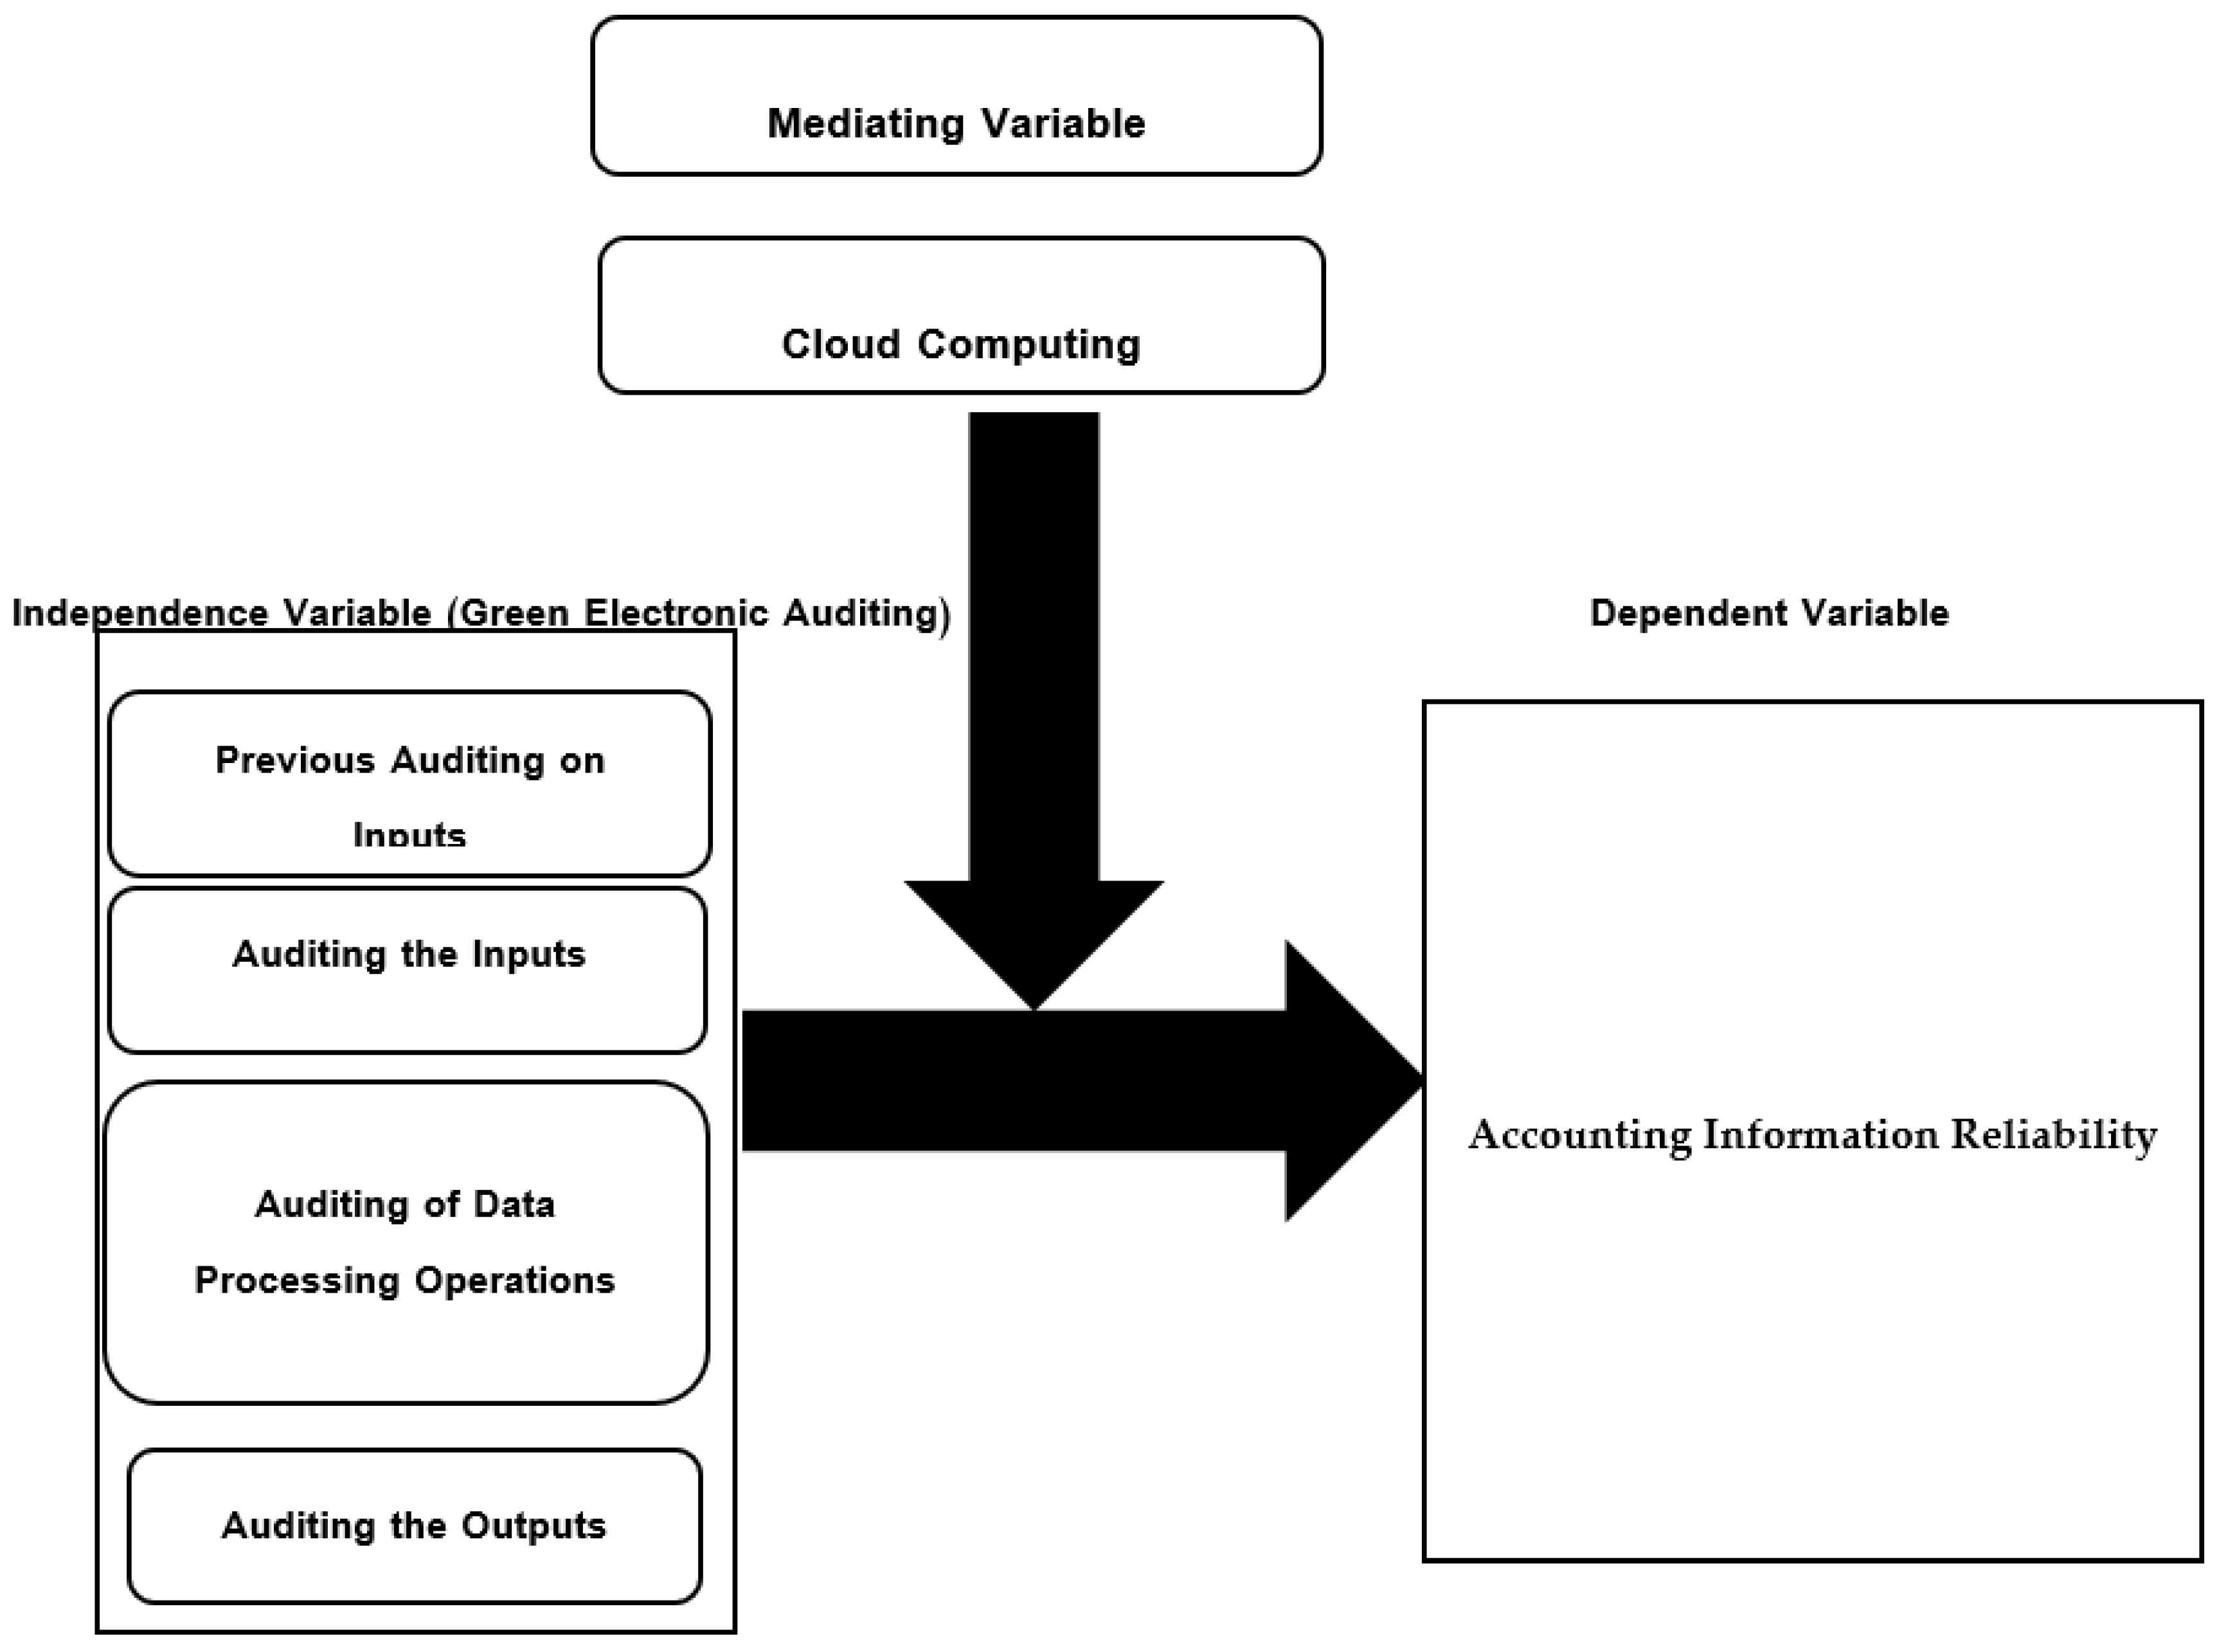 IJFS | Free Full-Text | Green Electronic Auditing and Accounting  Information Reliability in the Jordanian Social Security Corporation: The  Mediating Role of Cloud Computing